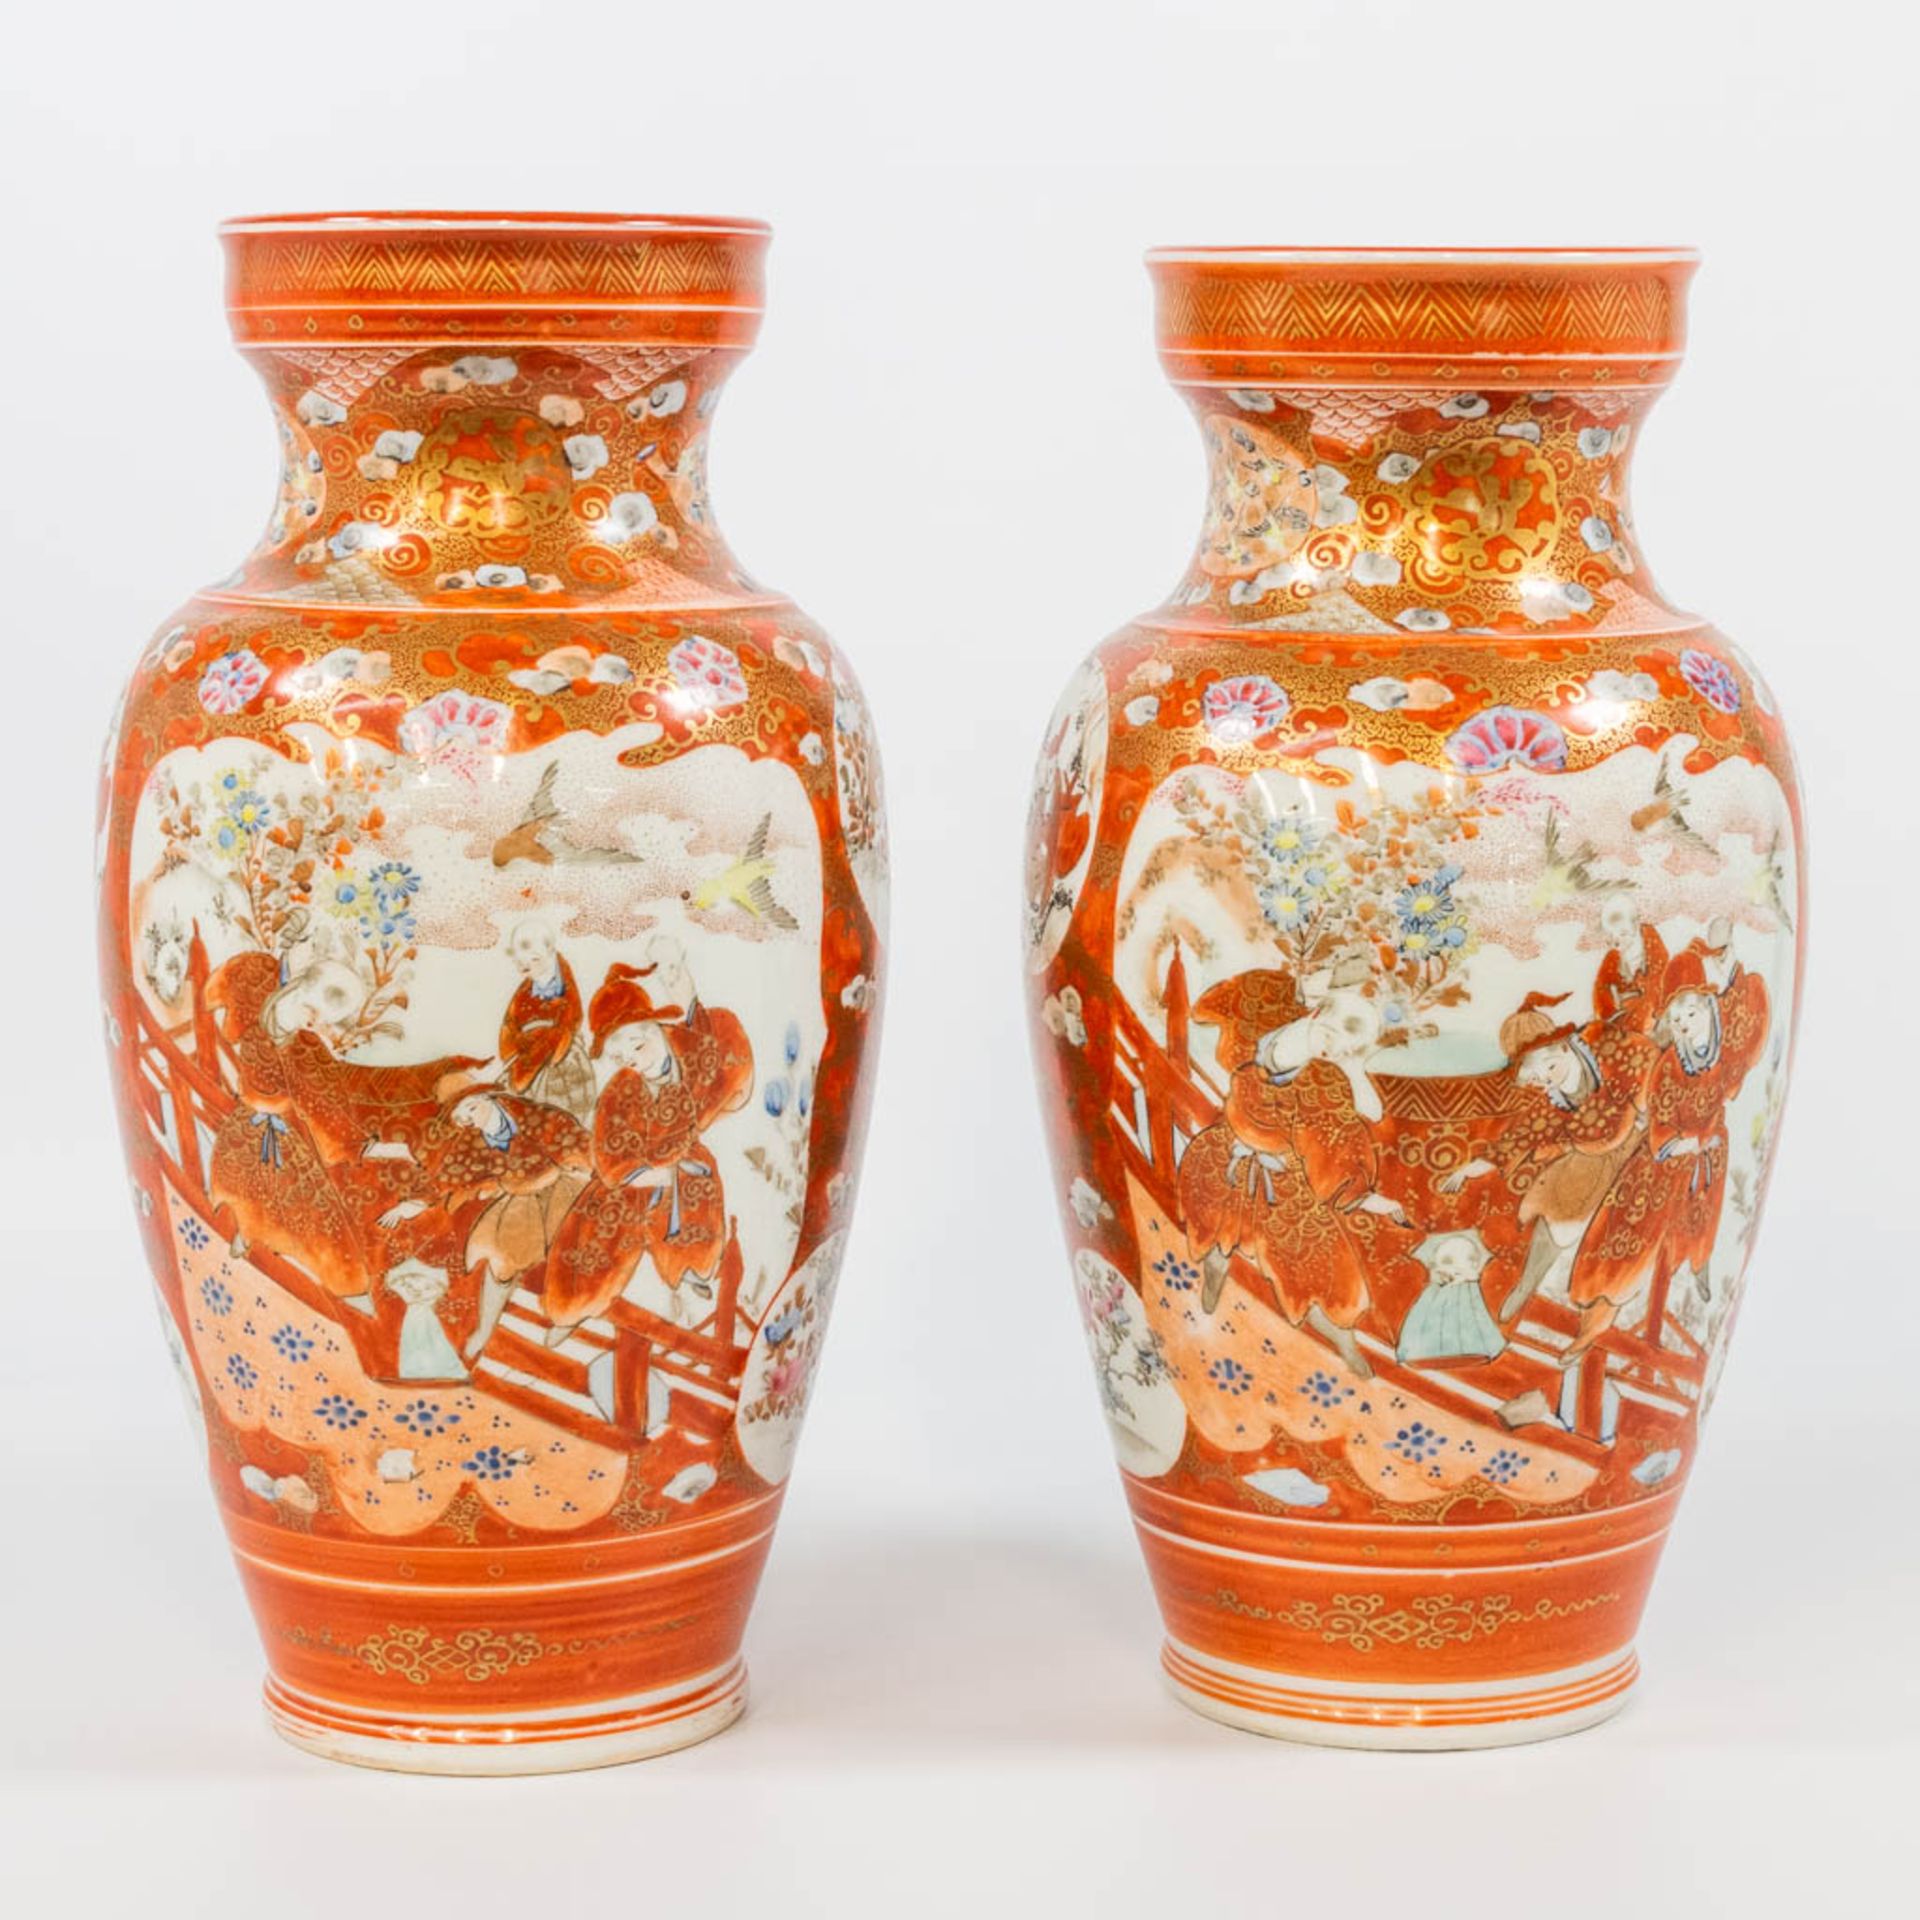 A collection of 2 Kutani vases, made in Japan. (32 x 16 cm)